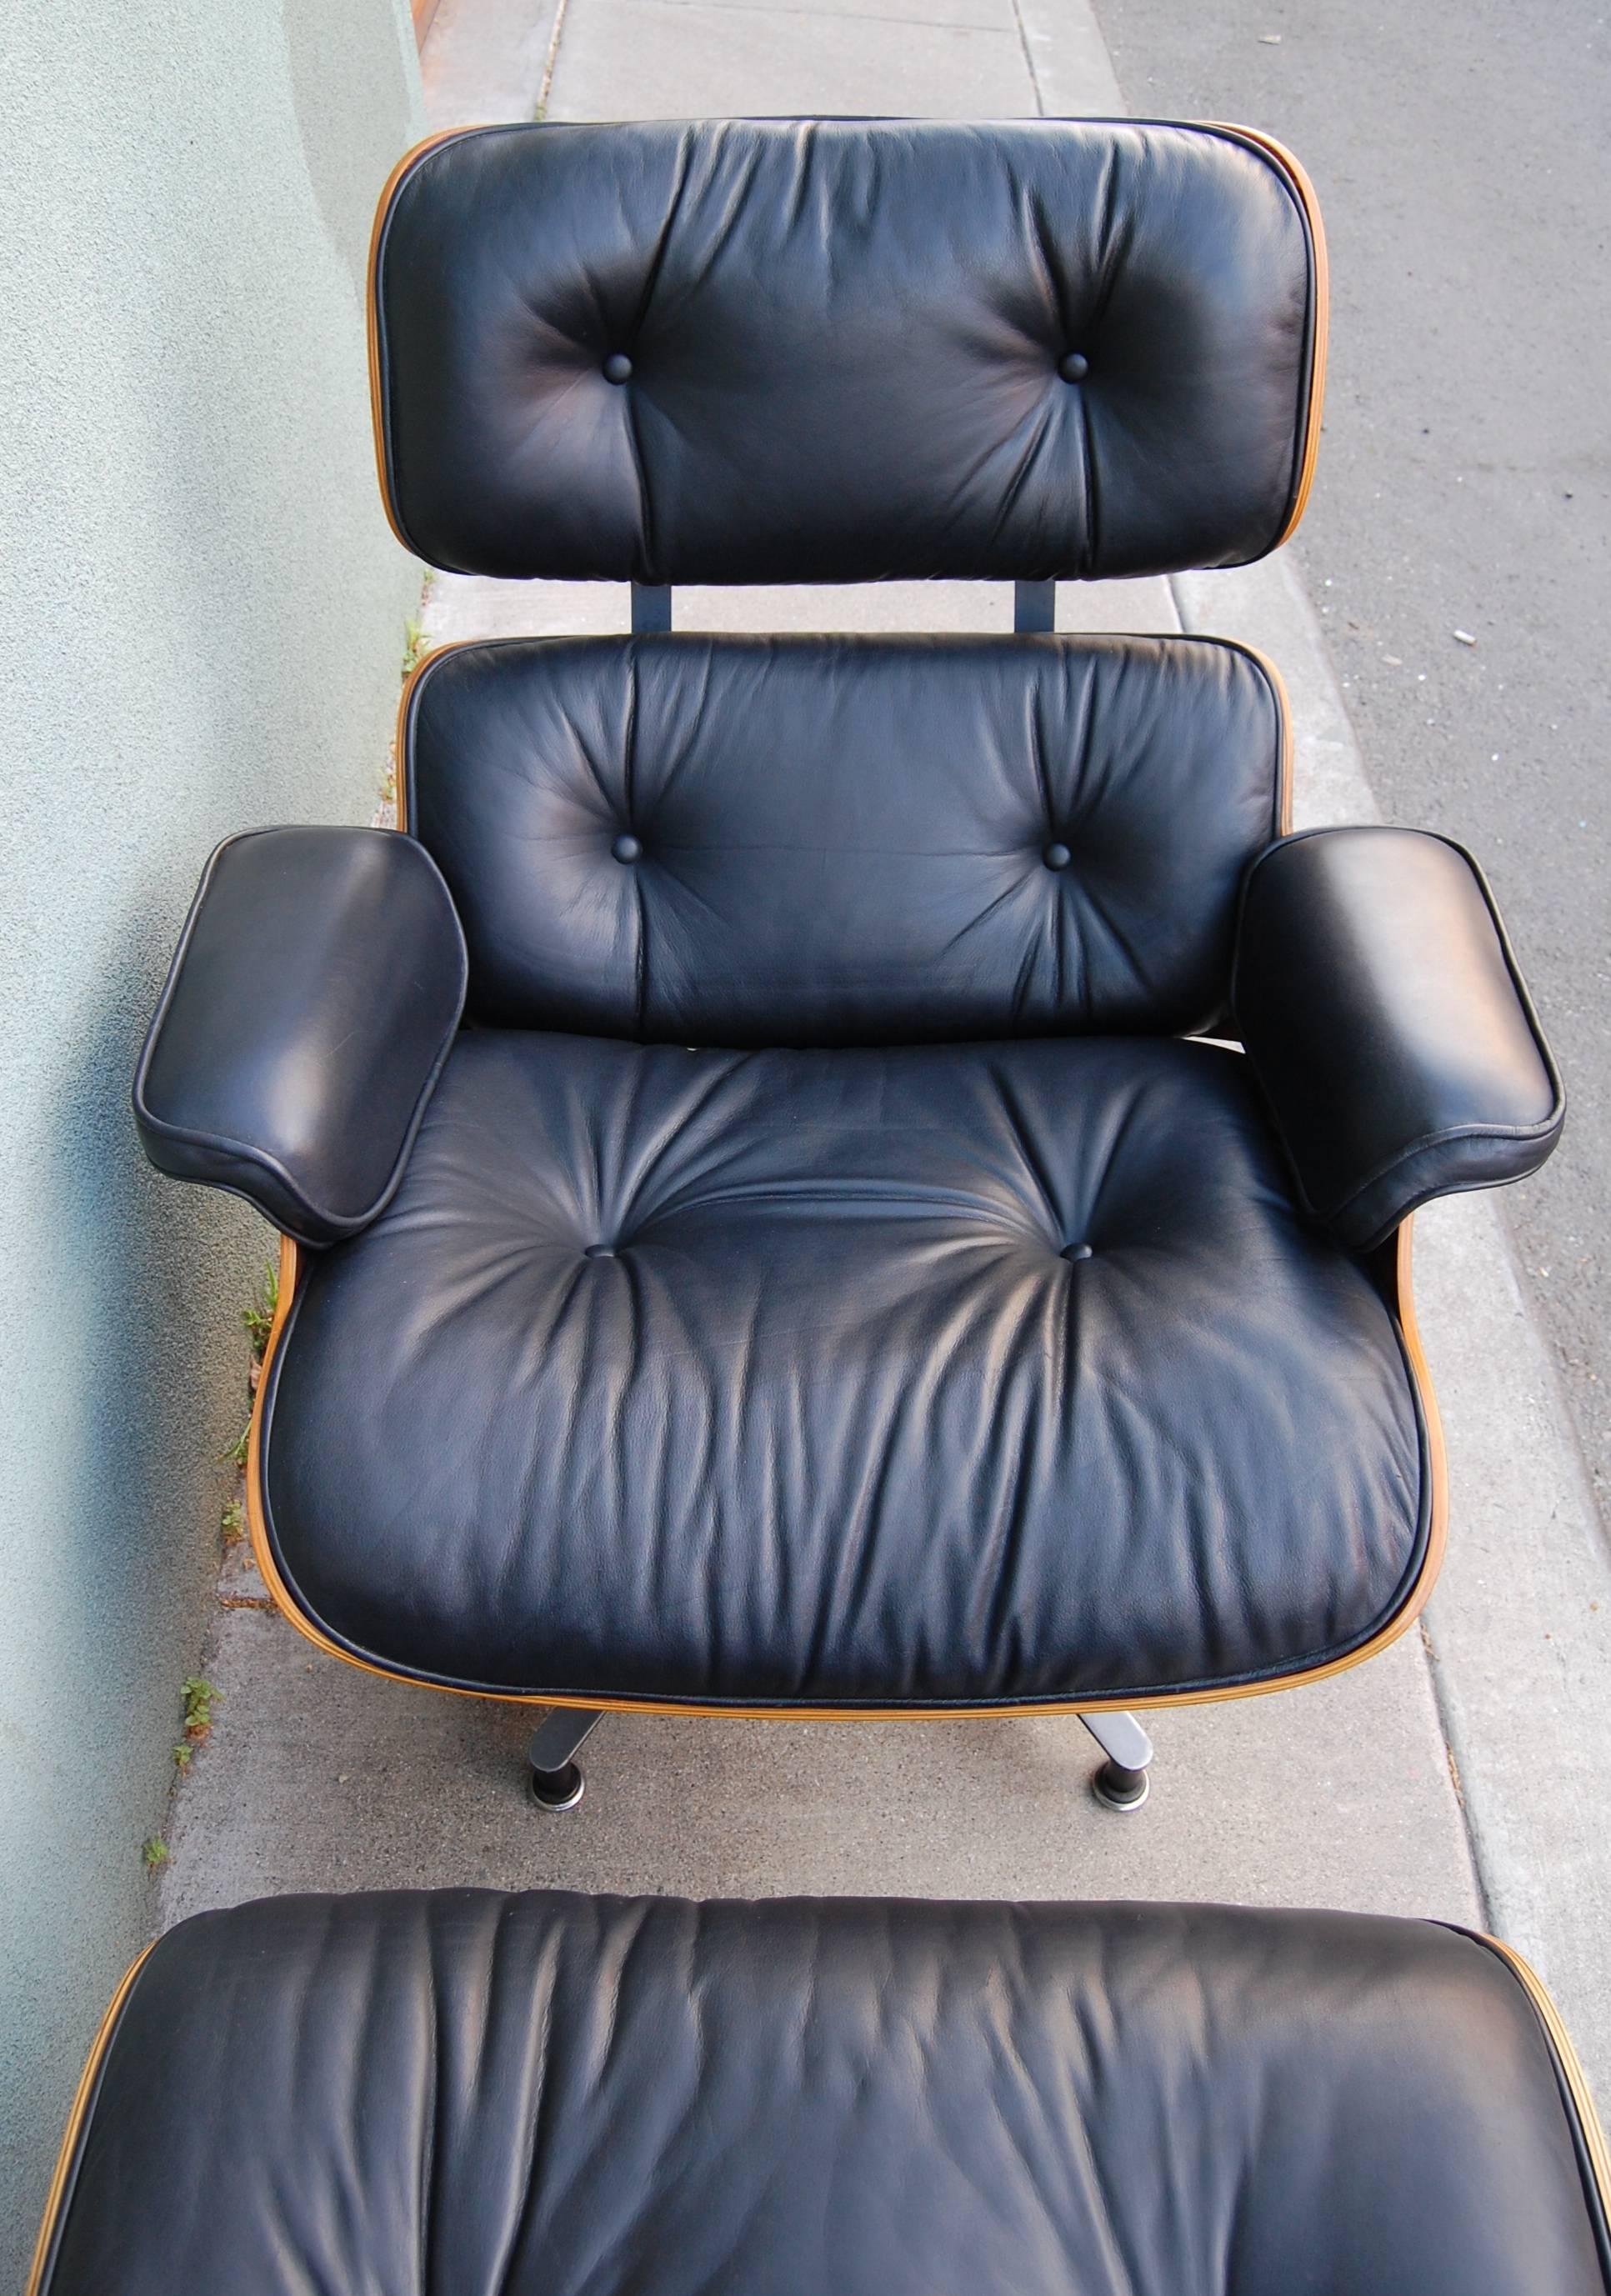 Oiled 1970s Eames Lounge and Ottoman 670 / 671